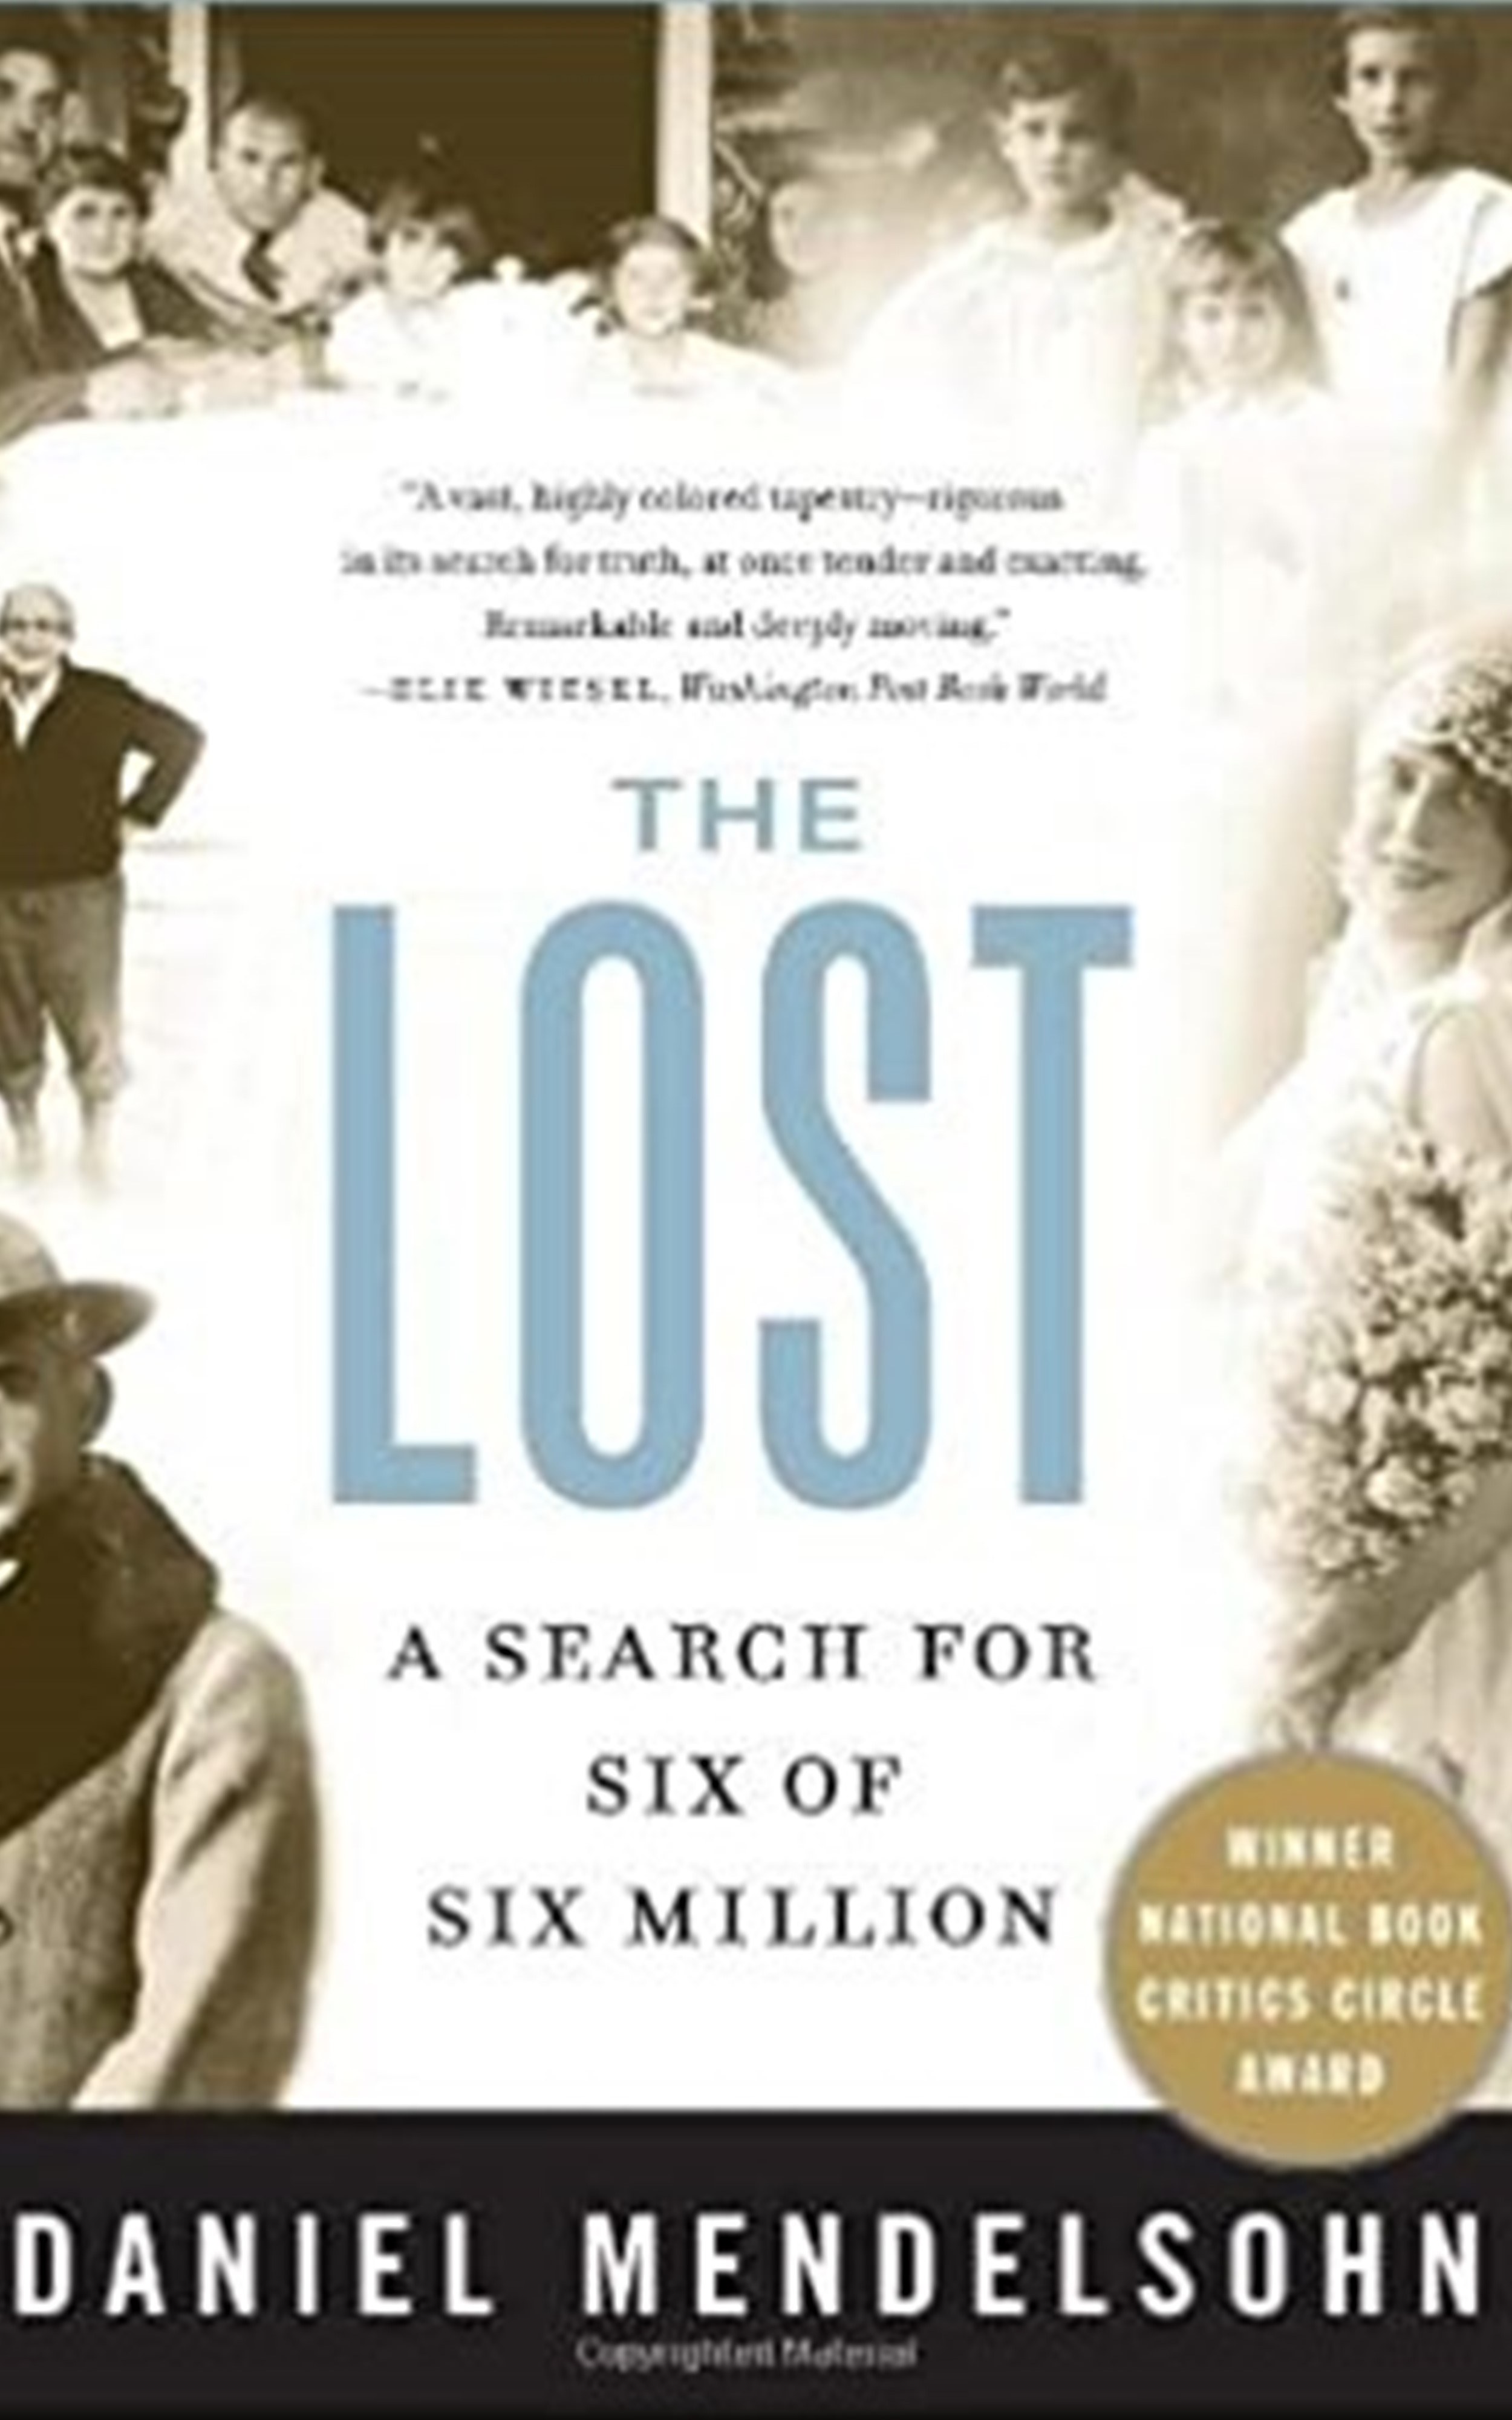 The Lost: A Search for Six Million by Daniel Mendelsohn